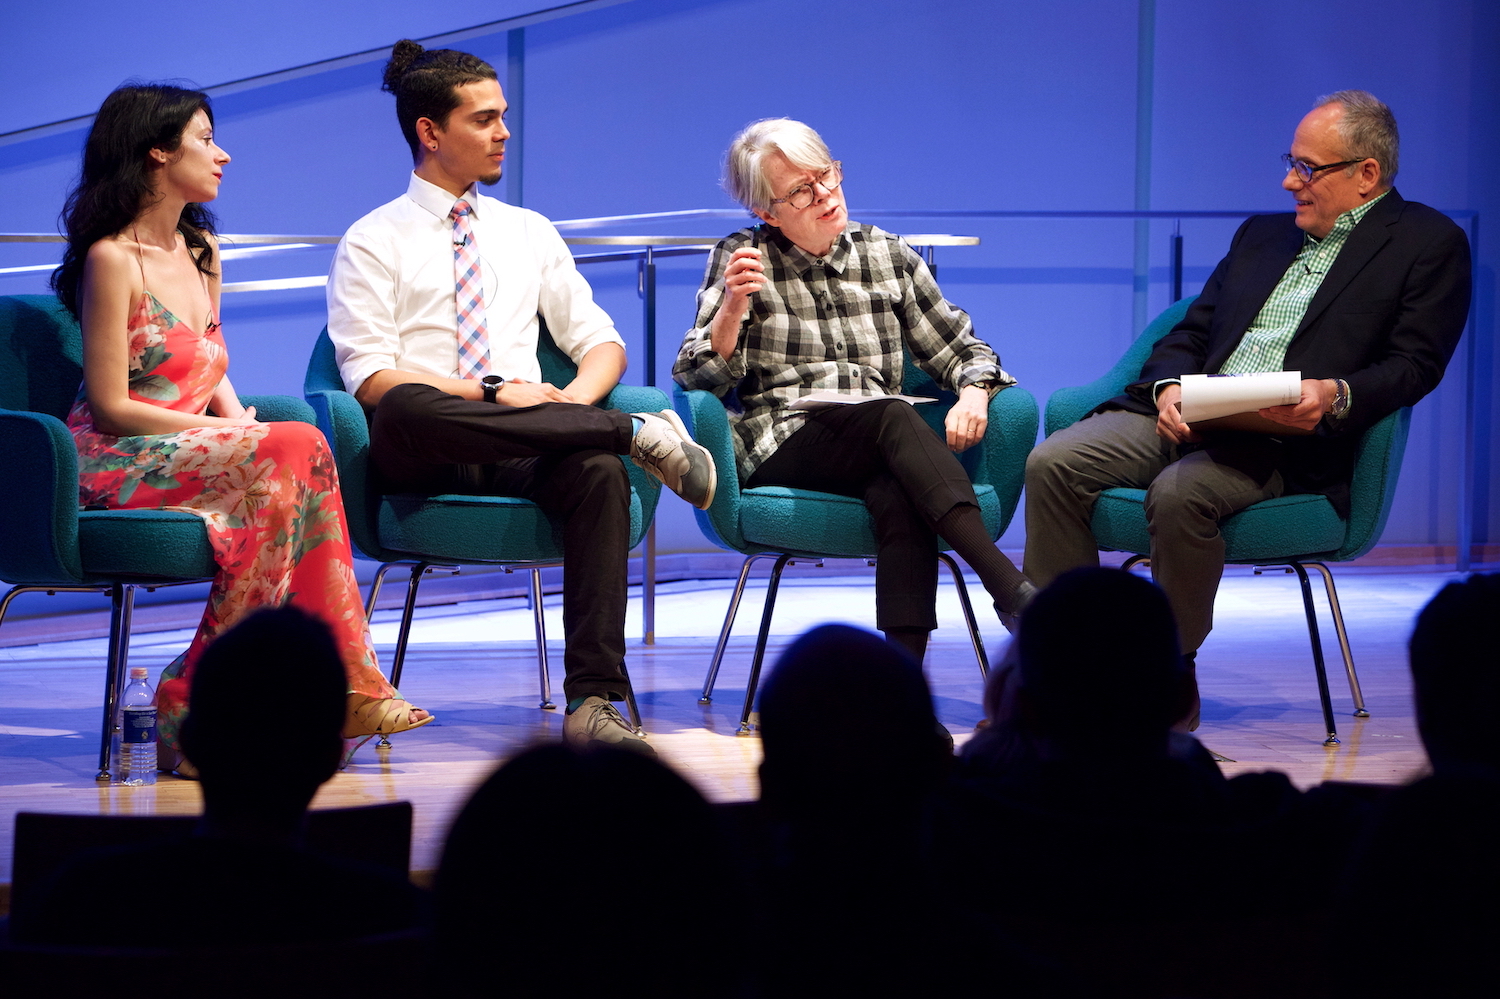 Four public program participants sit on a blue auditorium stage. A woman wearing glasses and a checked shirt is gesturing while speaking. The audience appears in the foreground in silhouette. 